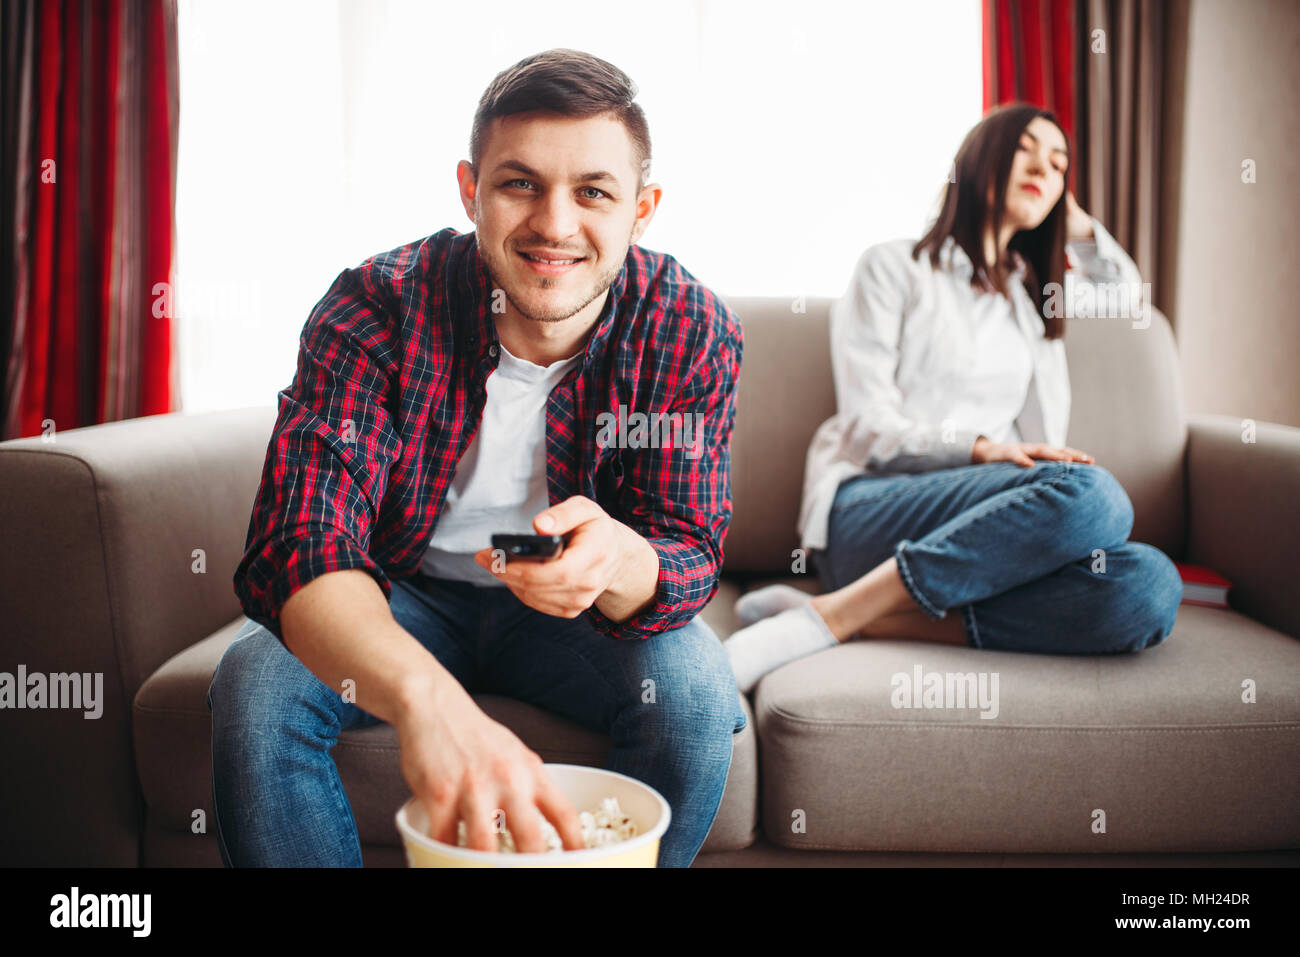 Man watch tv and eats popcorn, woman in a bad mood Stock Photo